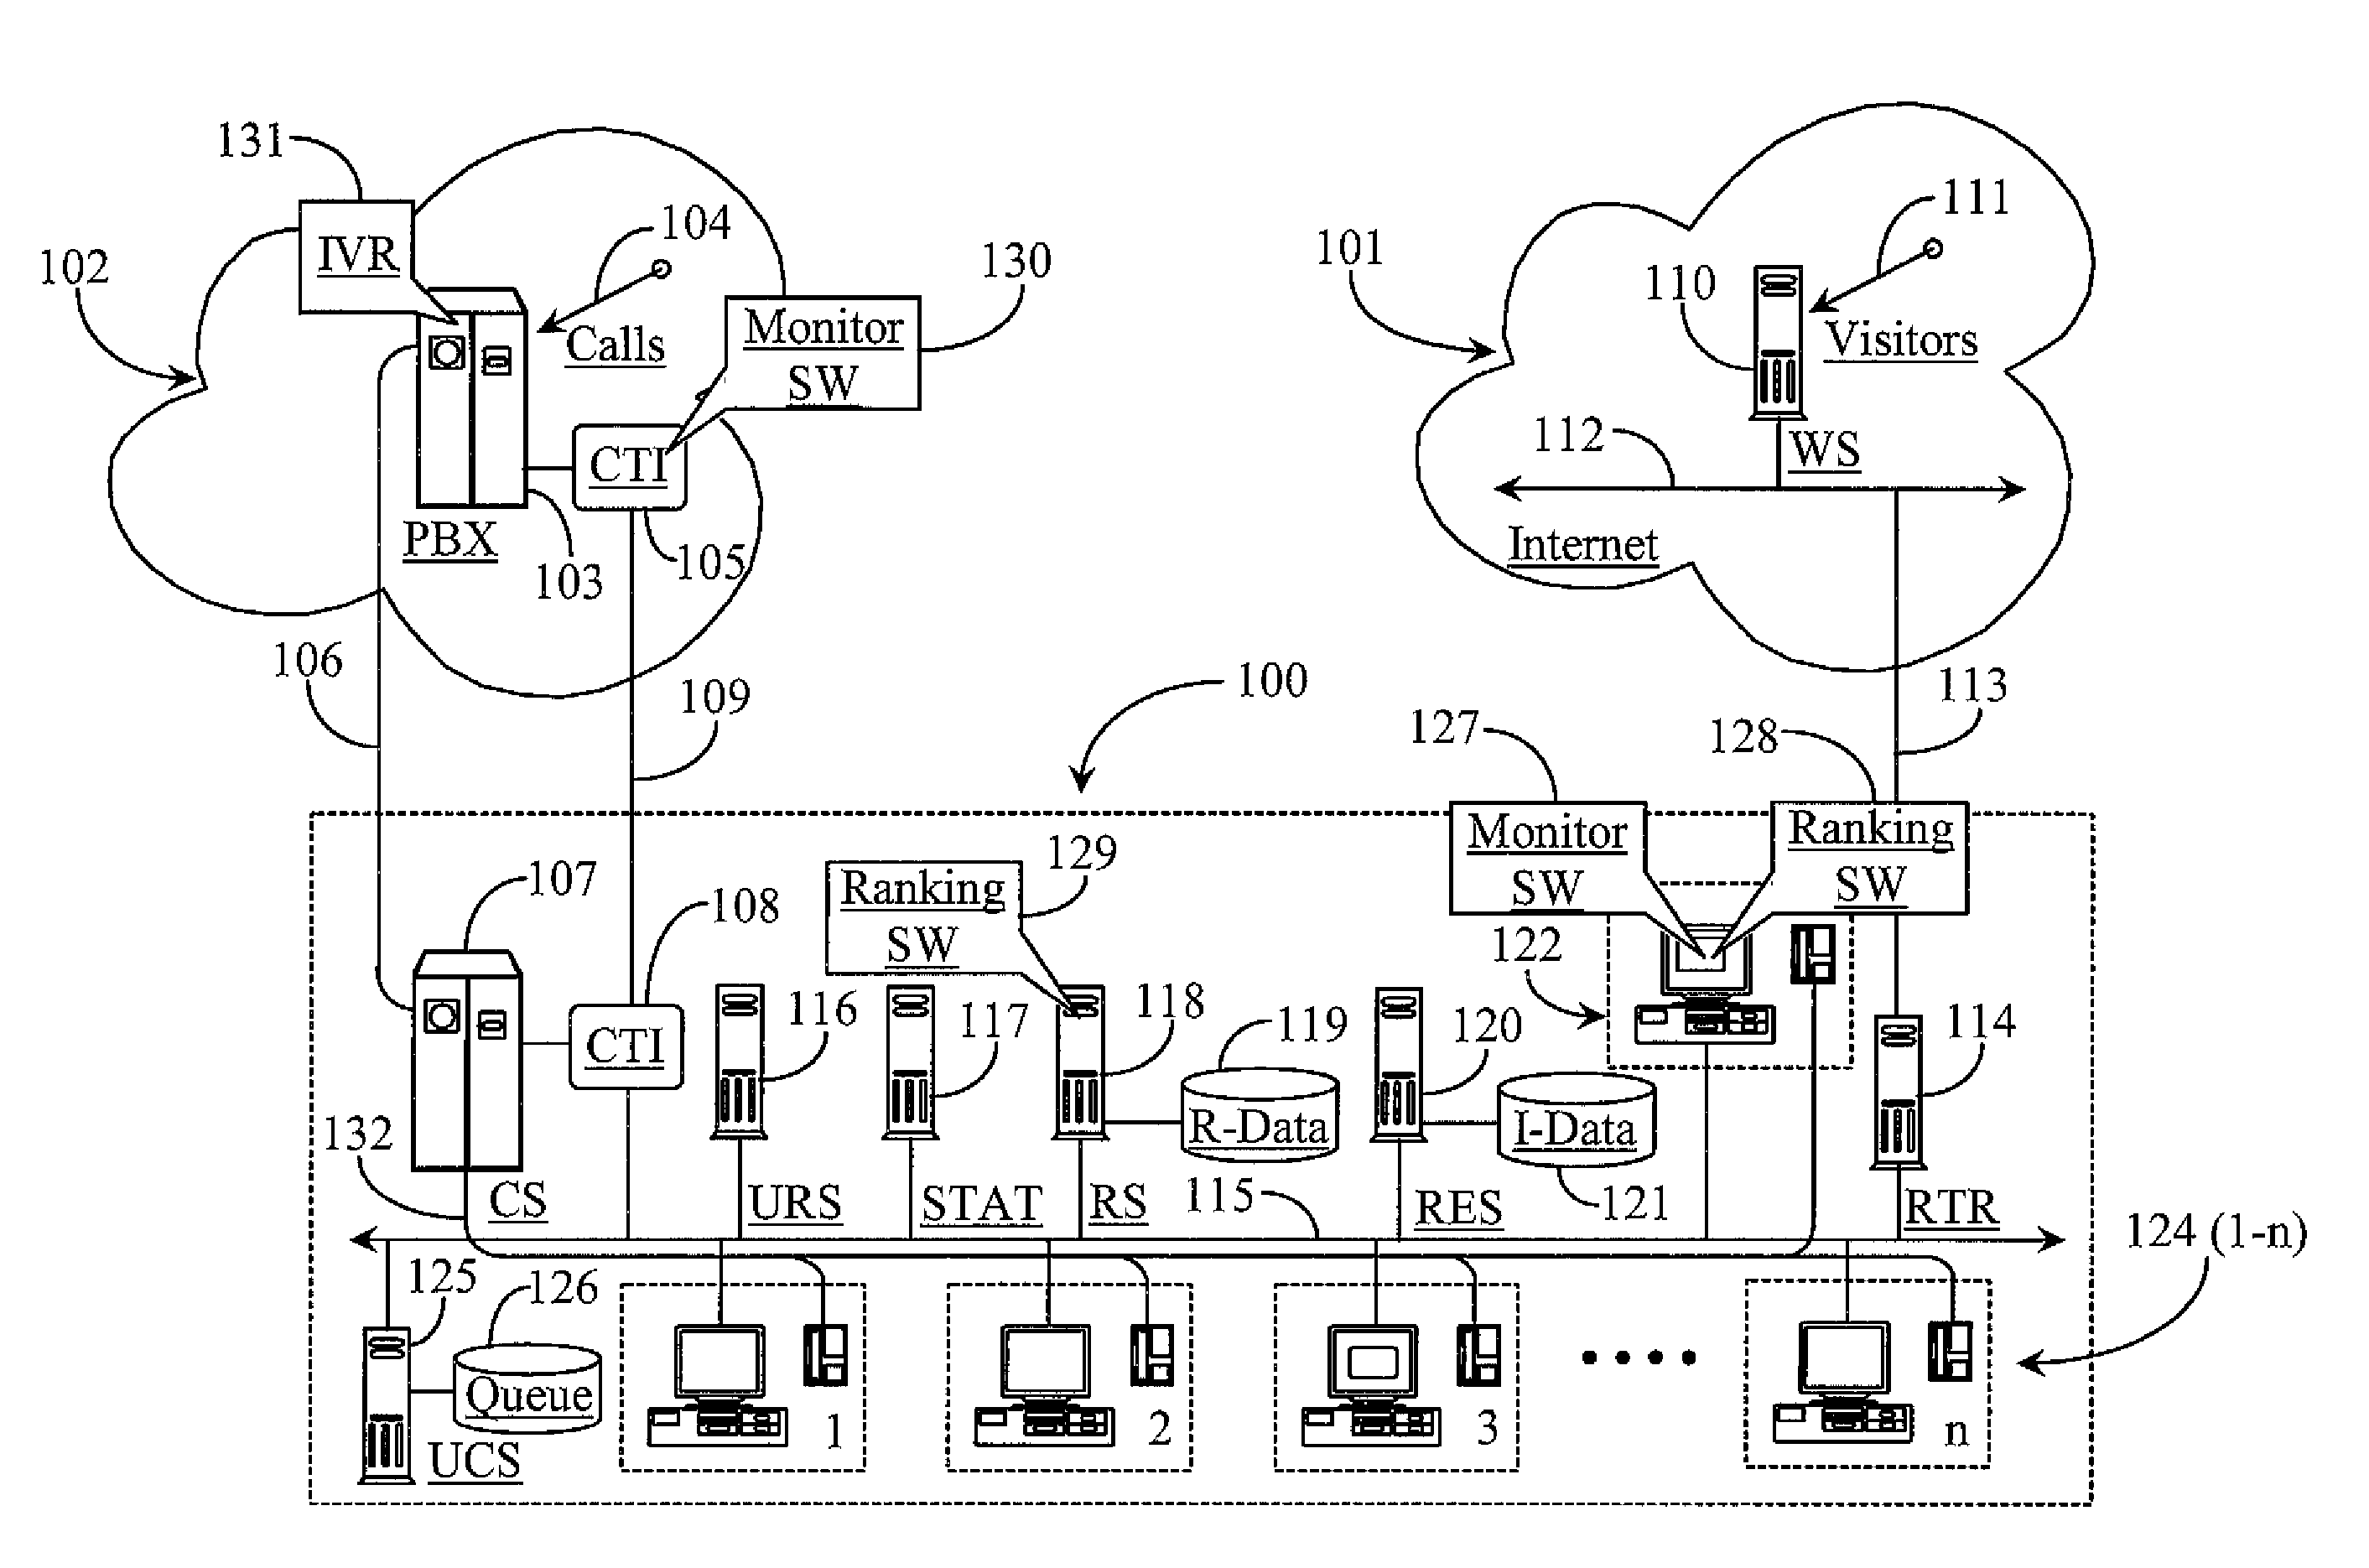 System and Methods for Scheduling and Optimizing Inbound Call Flow to a Call Center